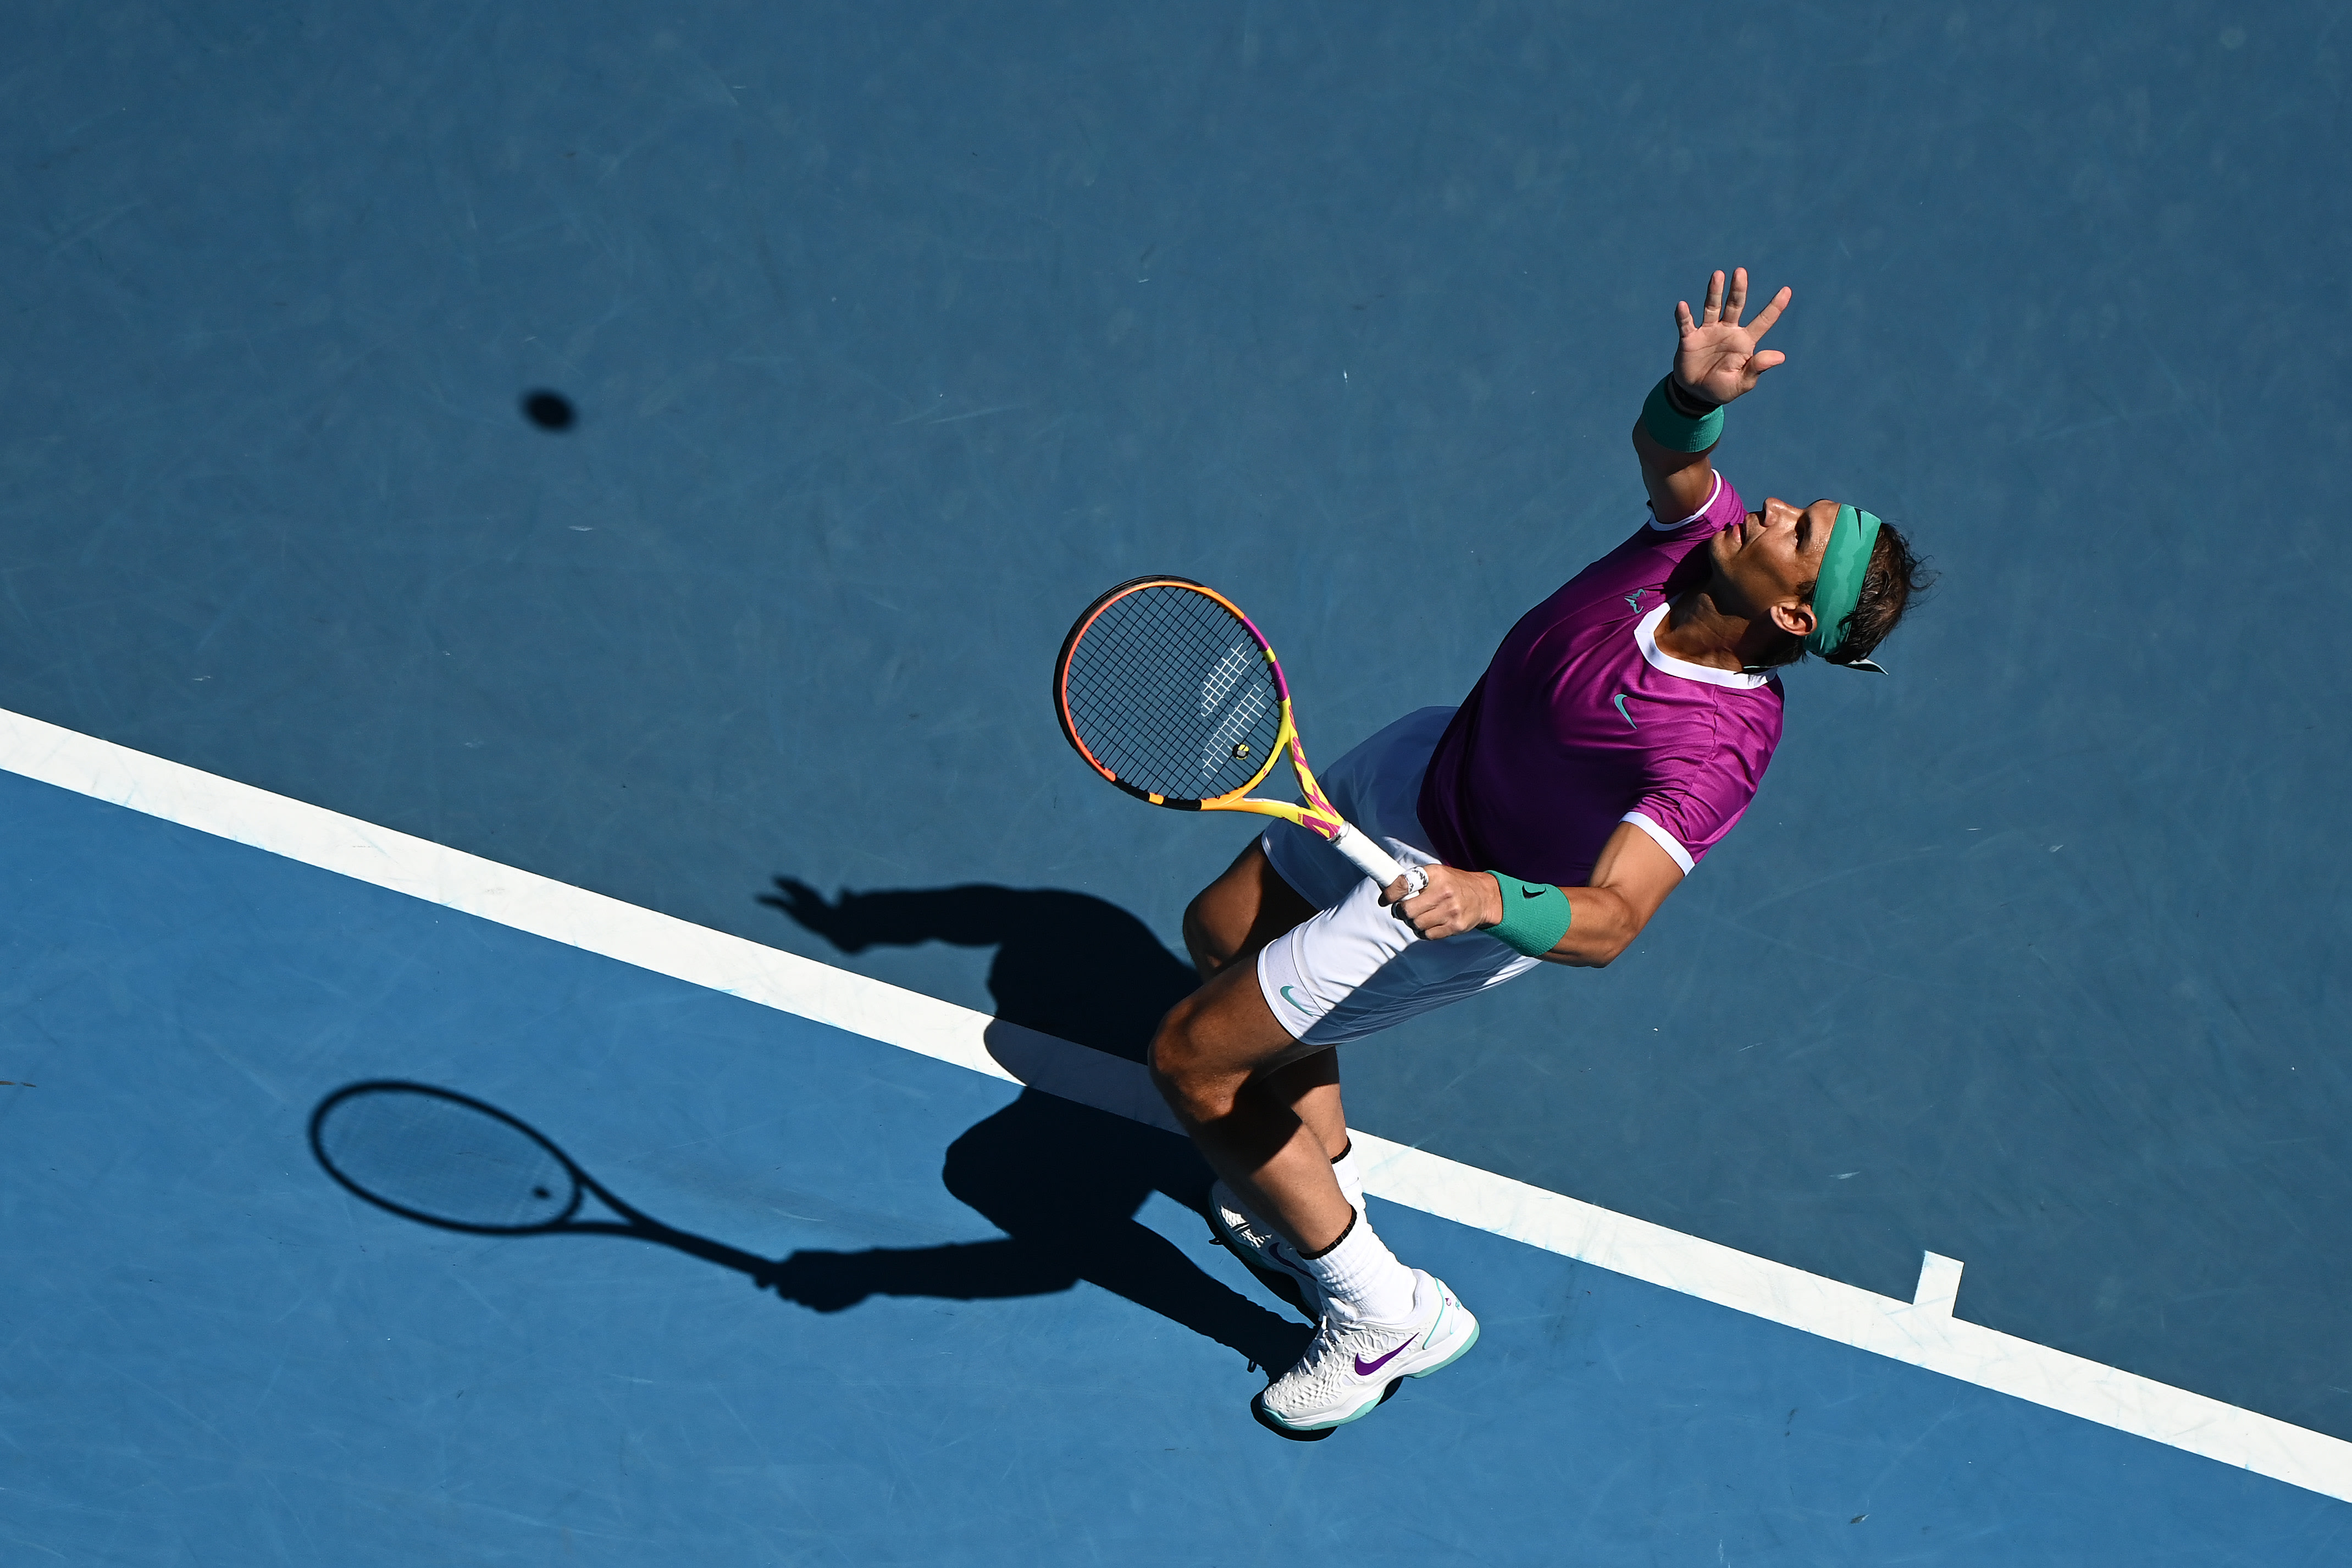 Rafael Nadal eases into uncertain Australian Open with emphatic opening